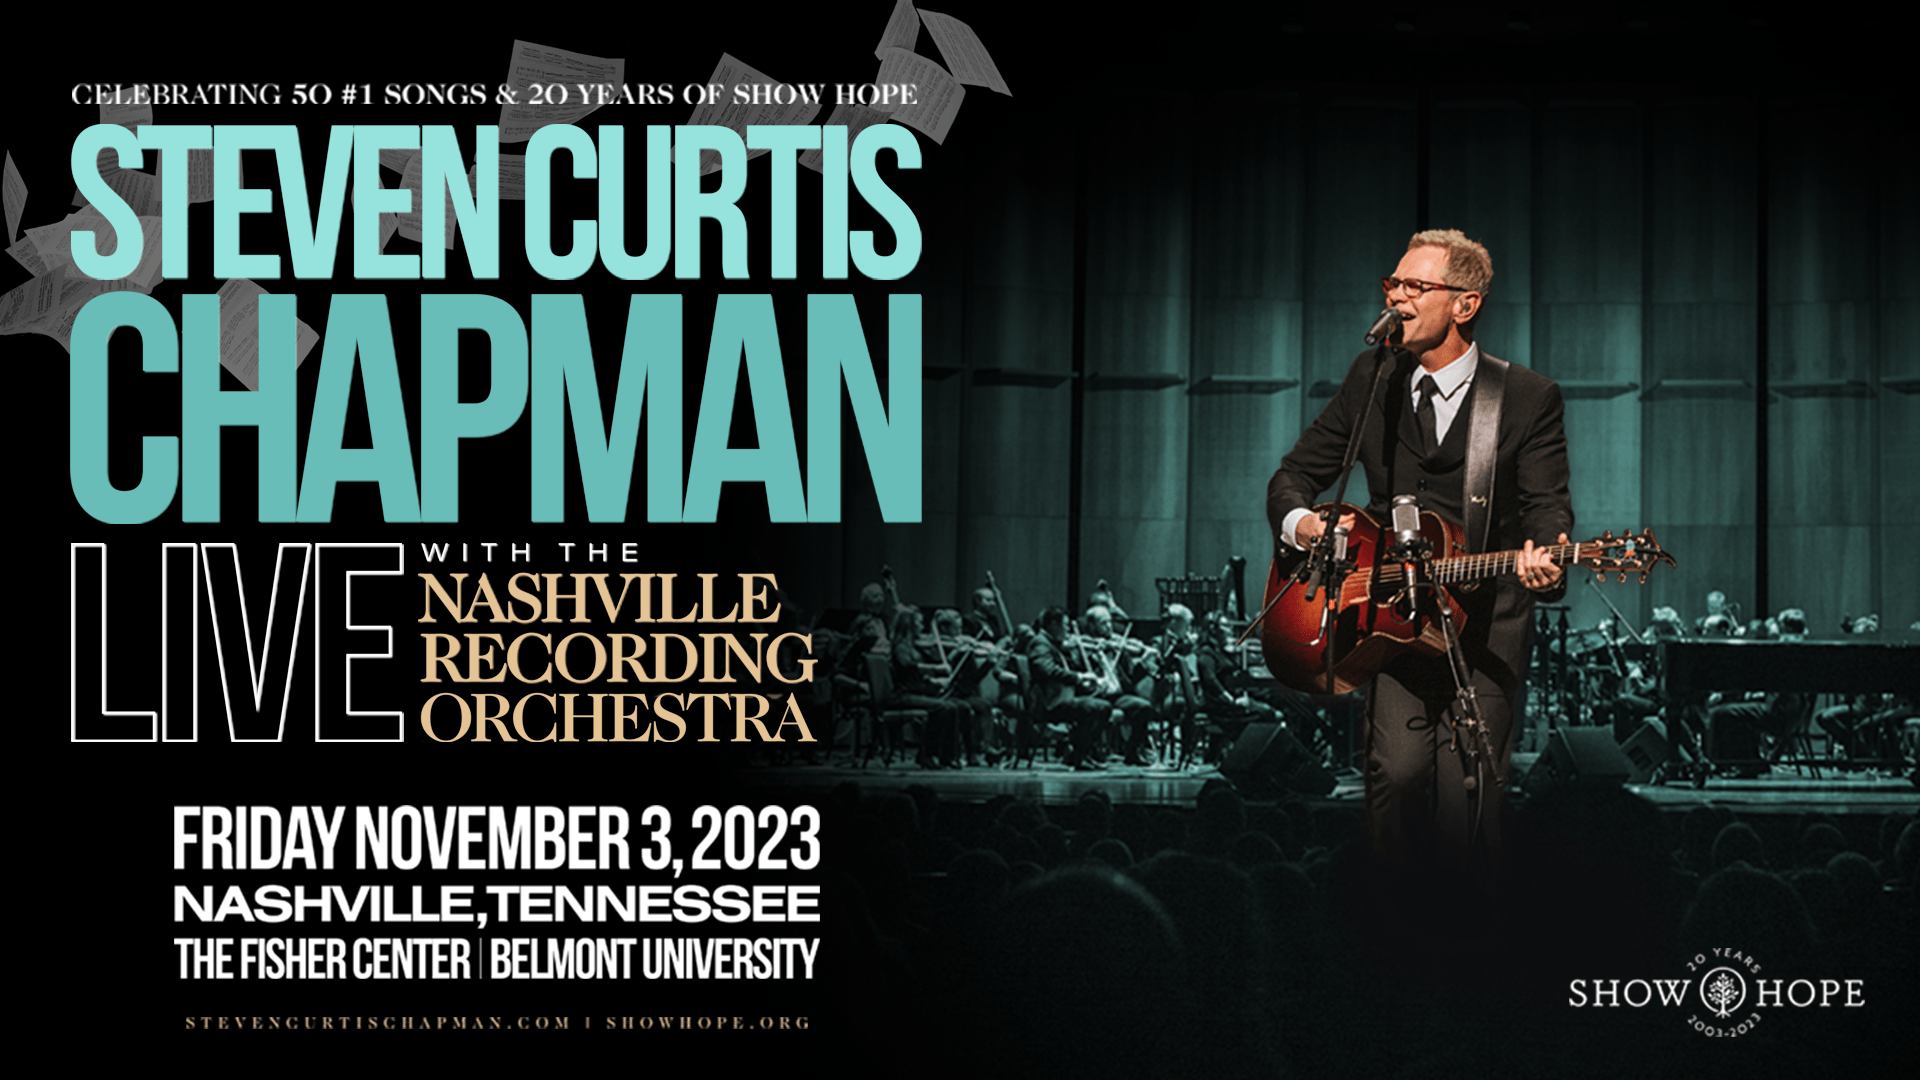 Steven Curtis Chapman Live with Nashville Recording Orchestra